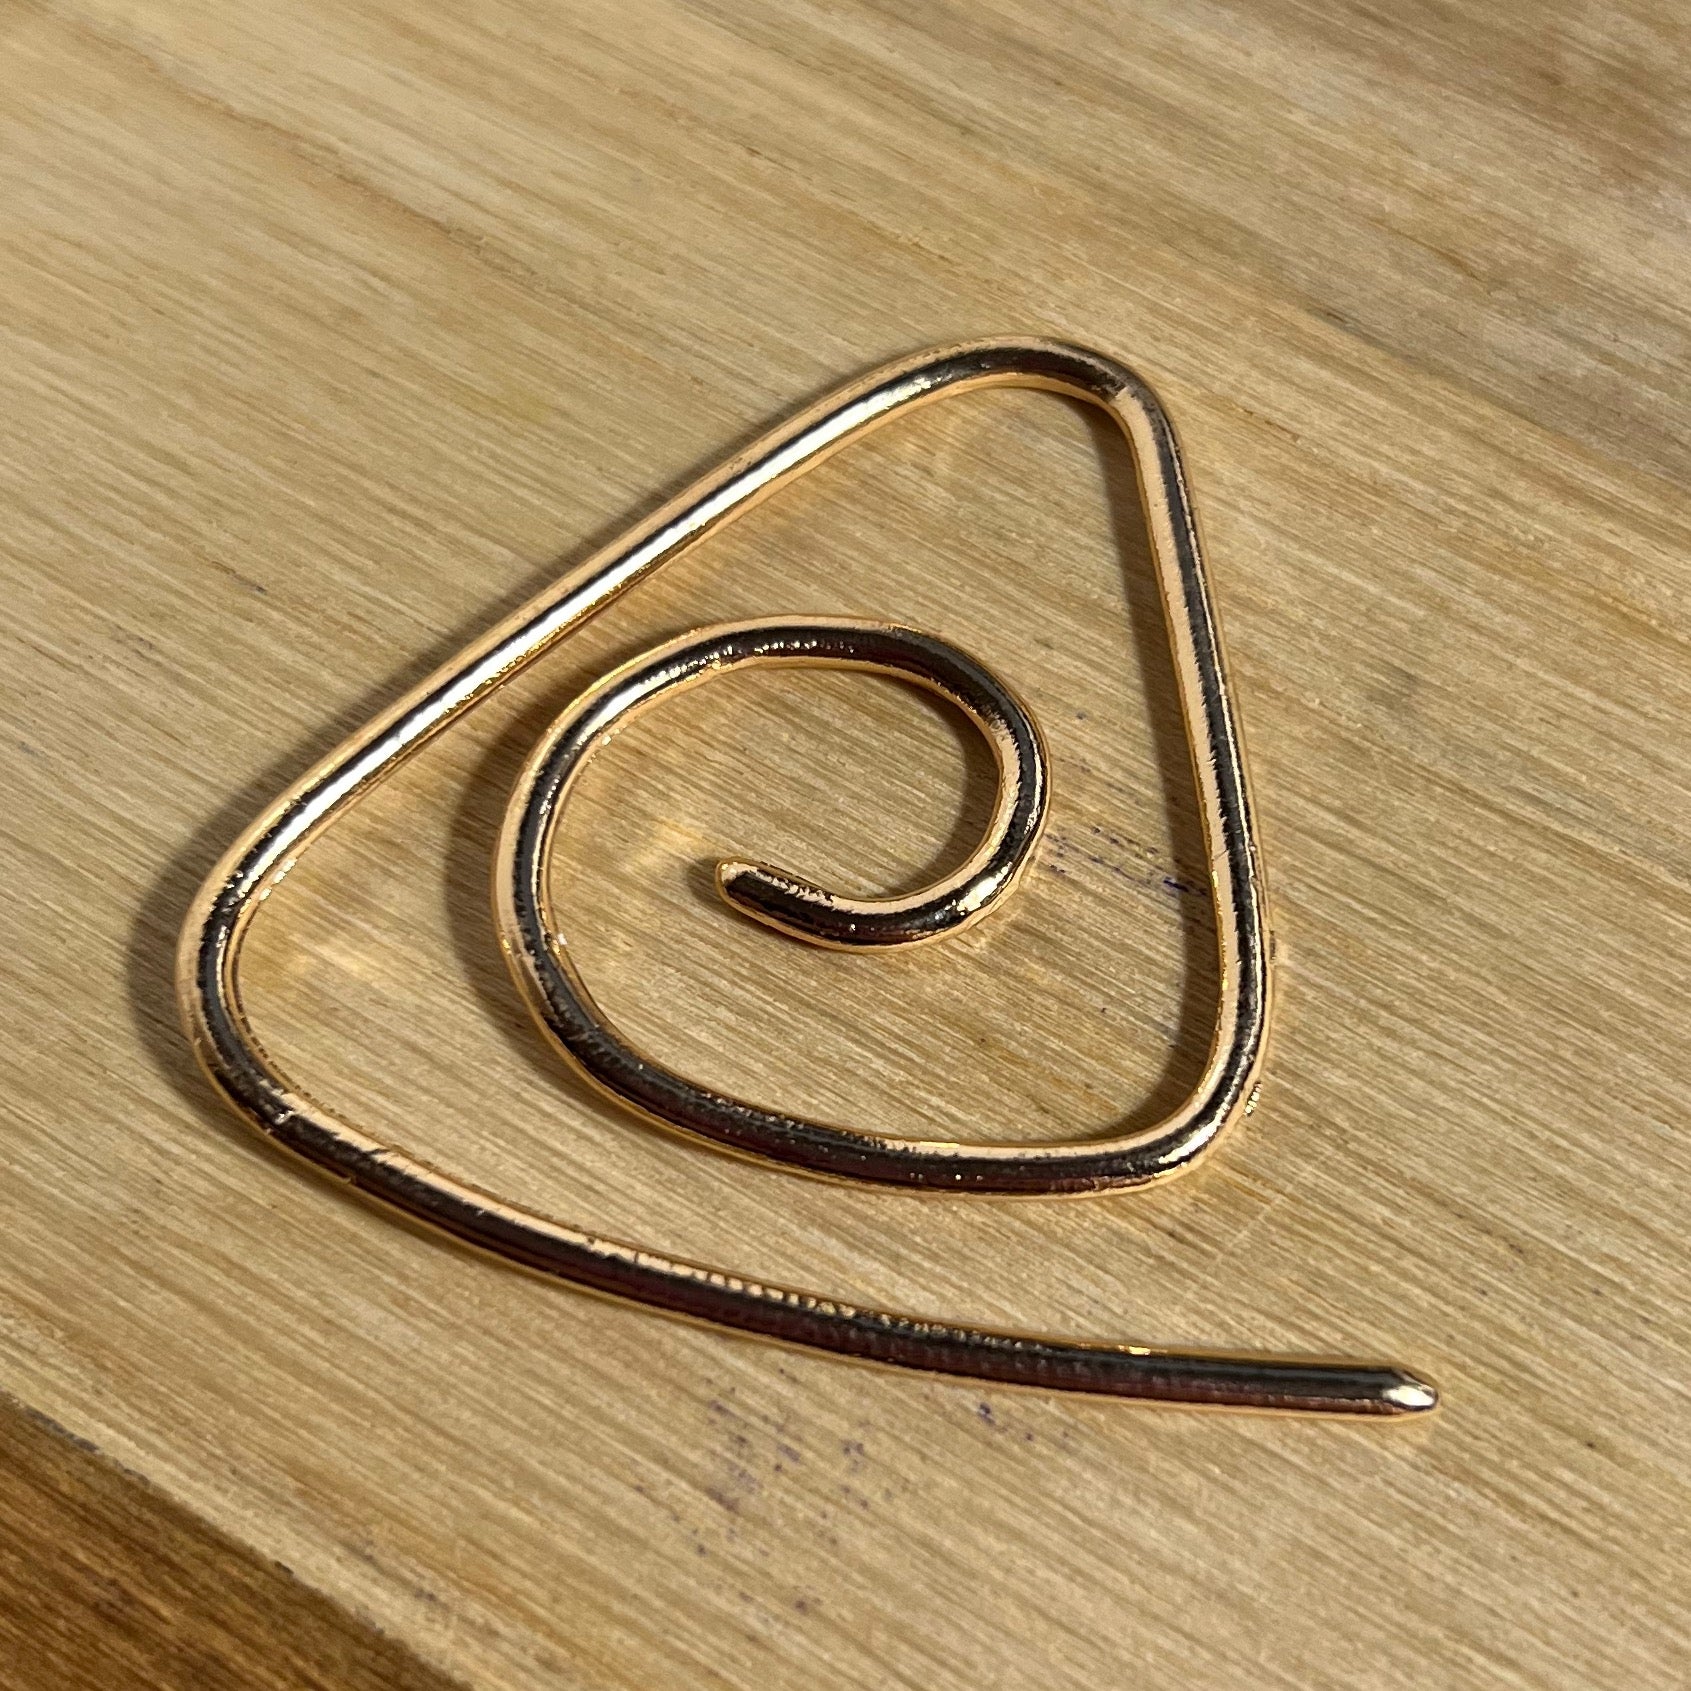 Curly Cable Needle